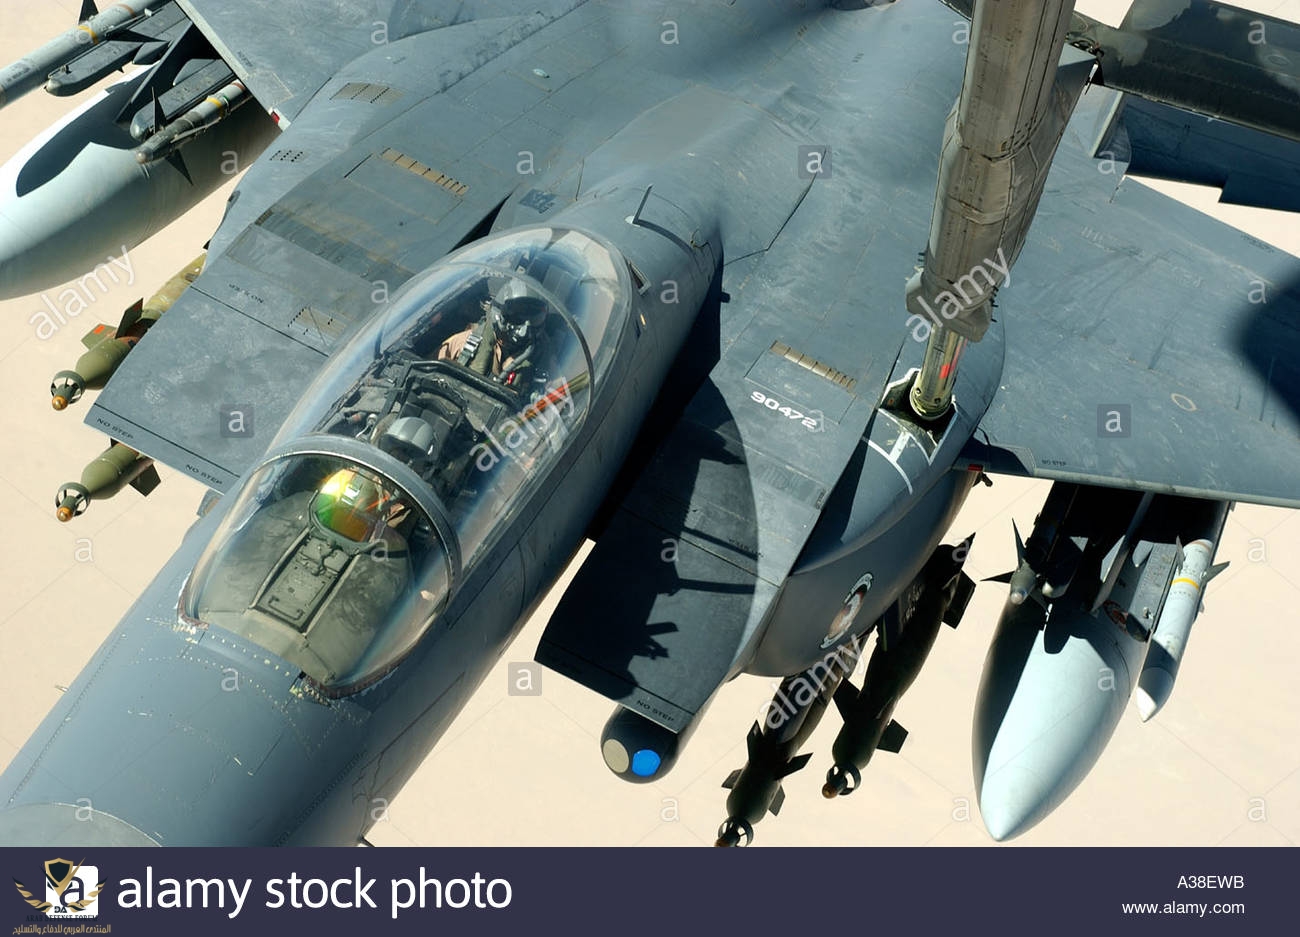 over-iraq-an-f-15-strike-eagle-recieves-fuel-from-a-kc-10-during-a-A38EWB.jpg